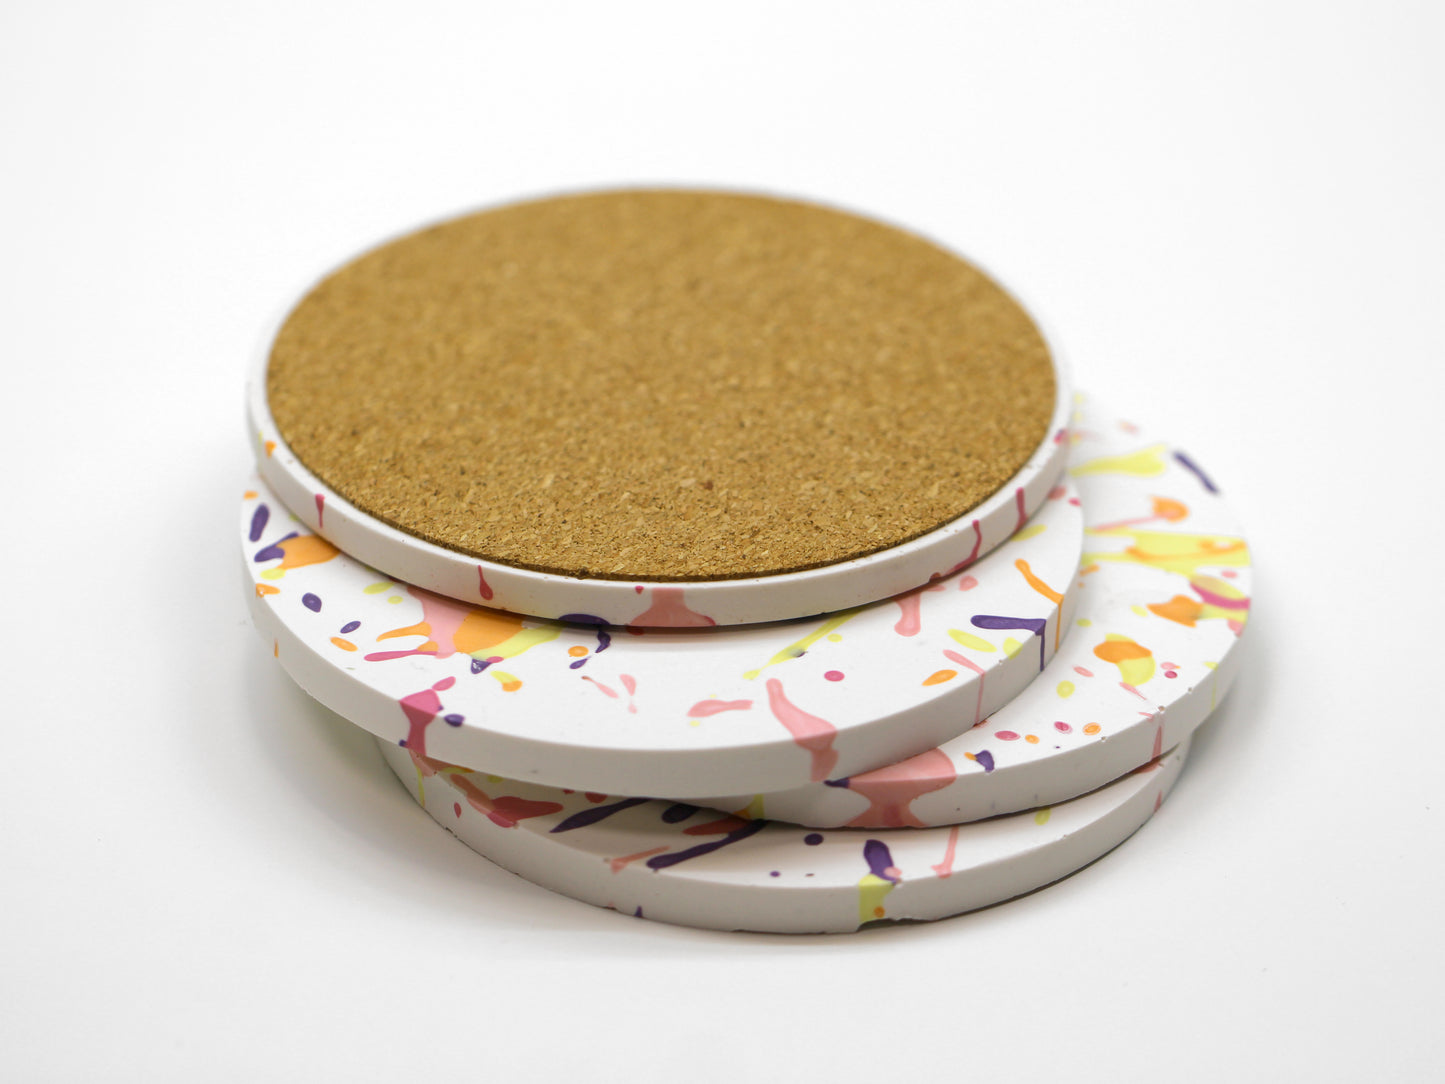 Set of 4 coasters with funky splashes